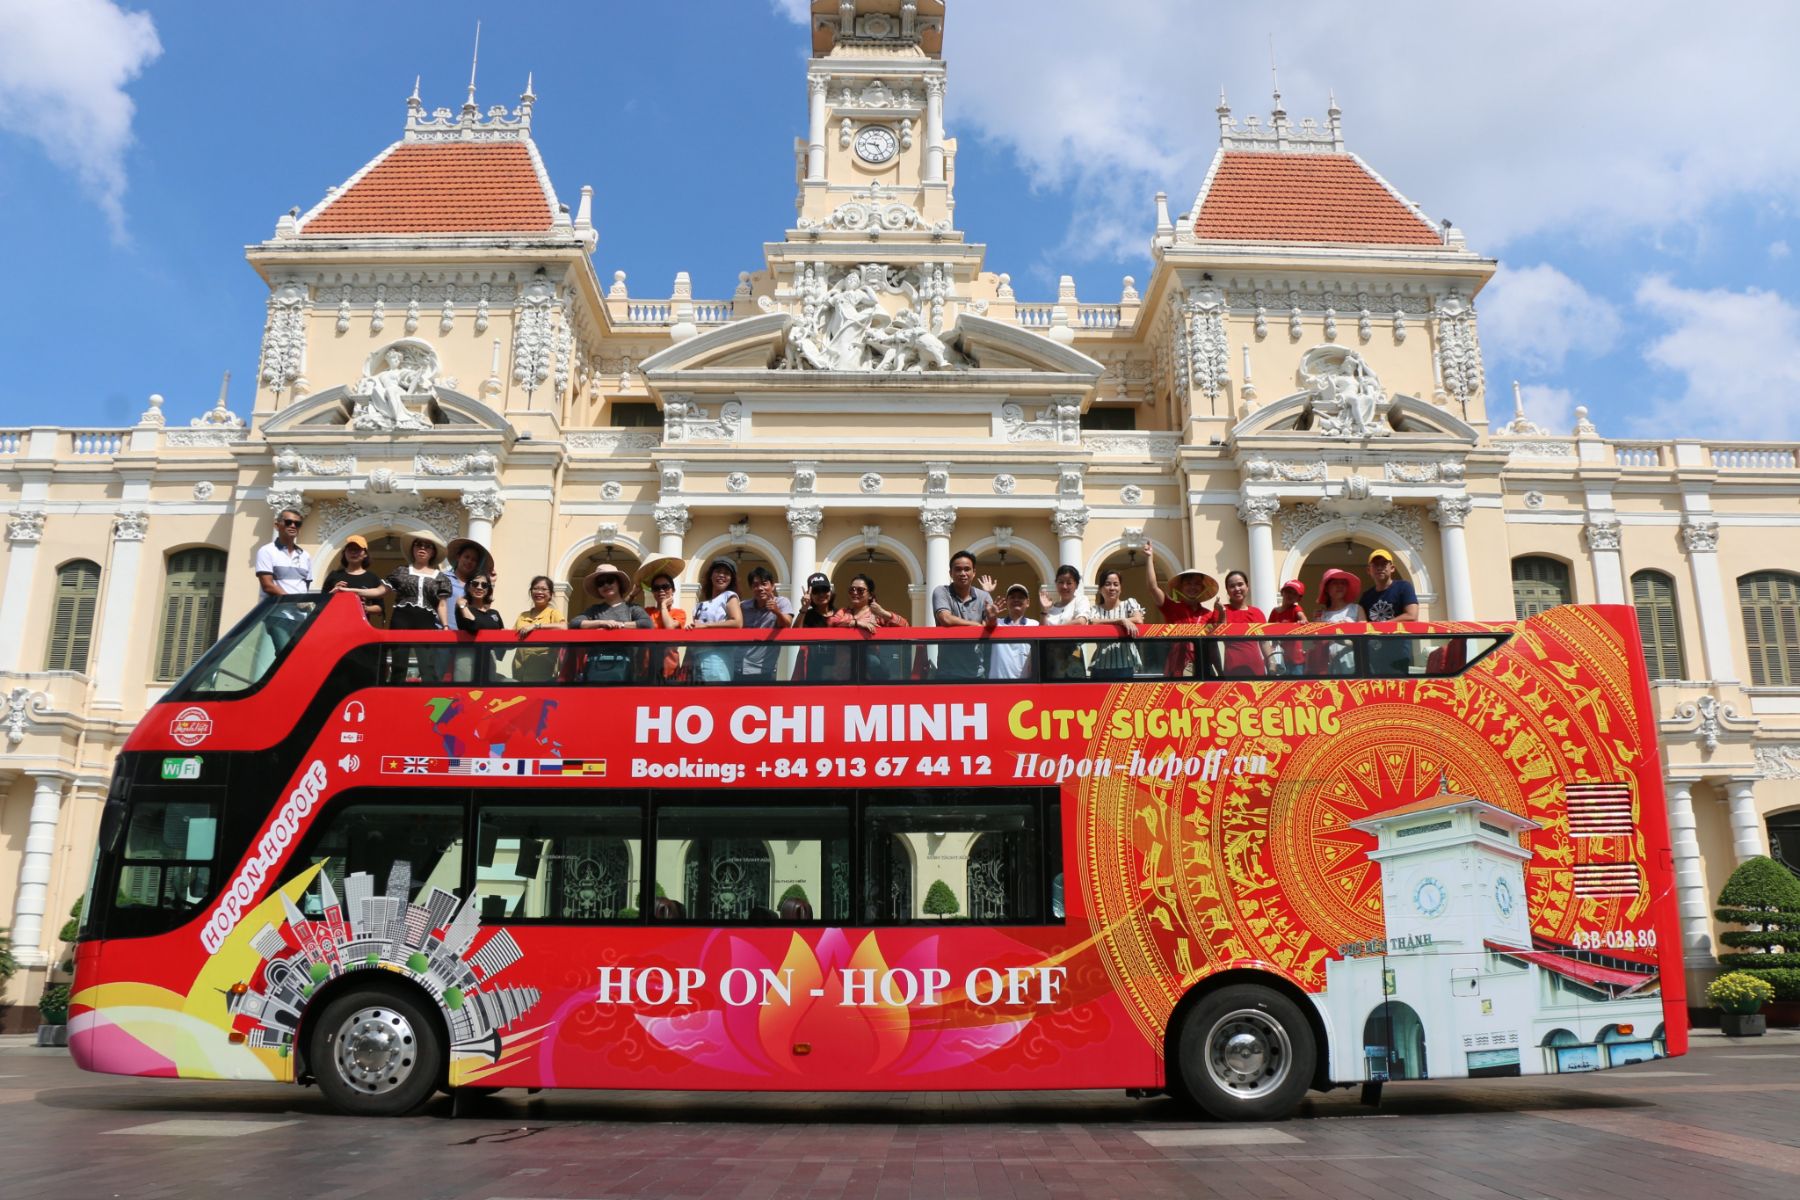 Get ready for an adventure, Explore the vibrant streets of Ho Chi Minh City on an unforgettable tour filled with discovering unique attractions and culture - where to visit Vietnam